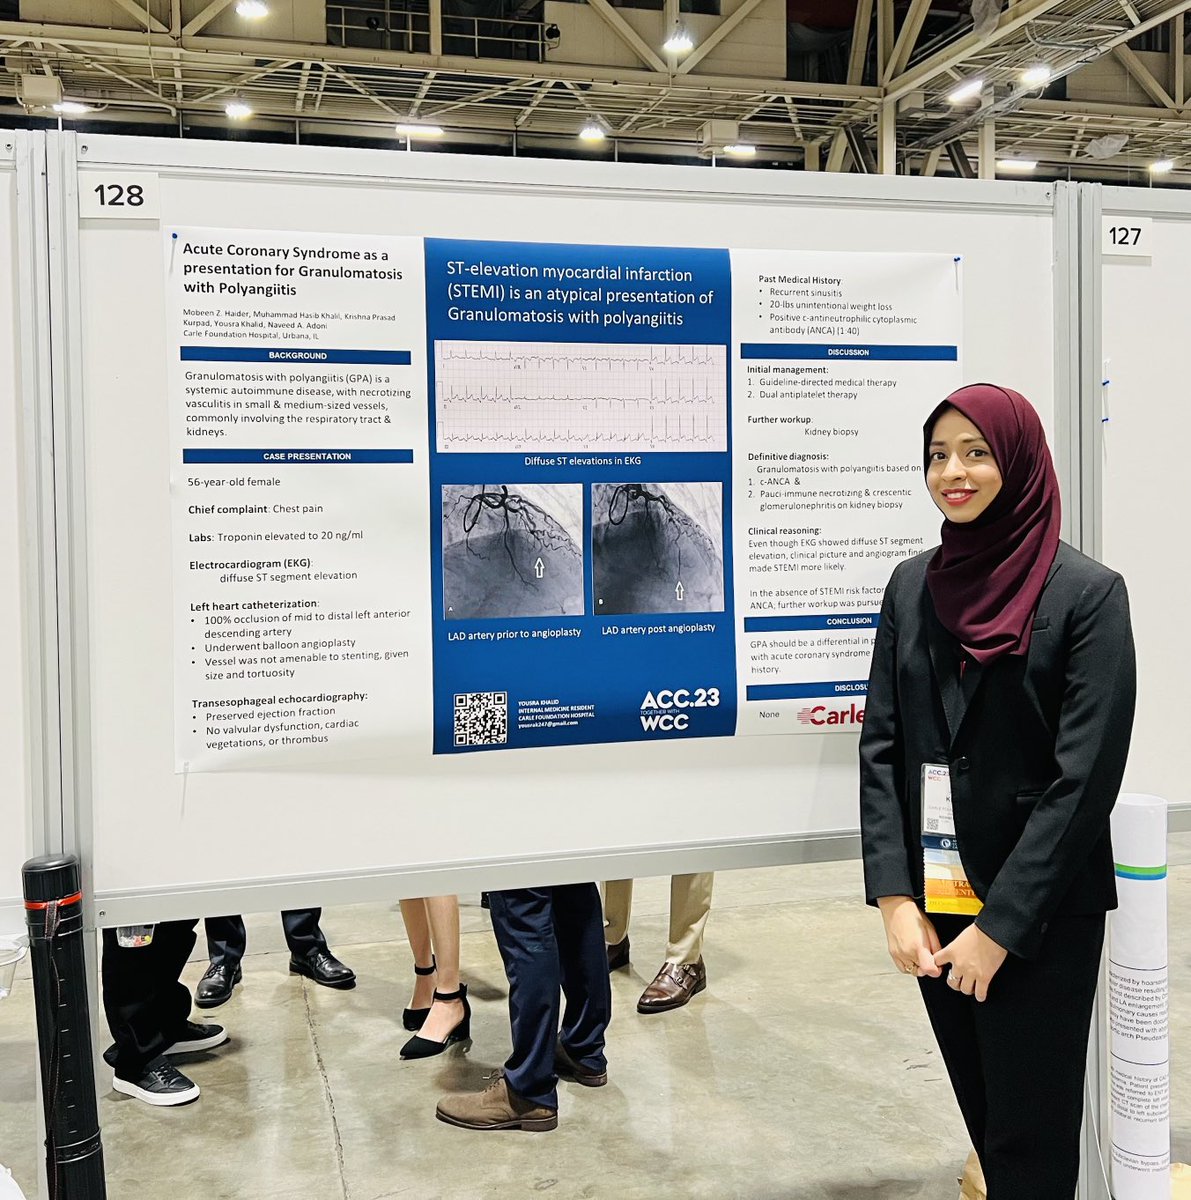 Thrilled to share this interesting presentation of granulomatosis with polyangiitis as ACS 

My first poster presentation! Honored to get insights and feedback! 
  
#March5,2023
⁦@ACCinTouch⁩ #NewOrleans #ACC2023